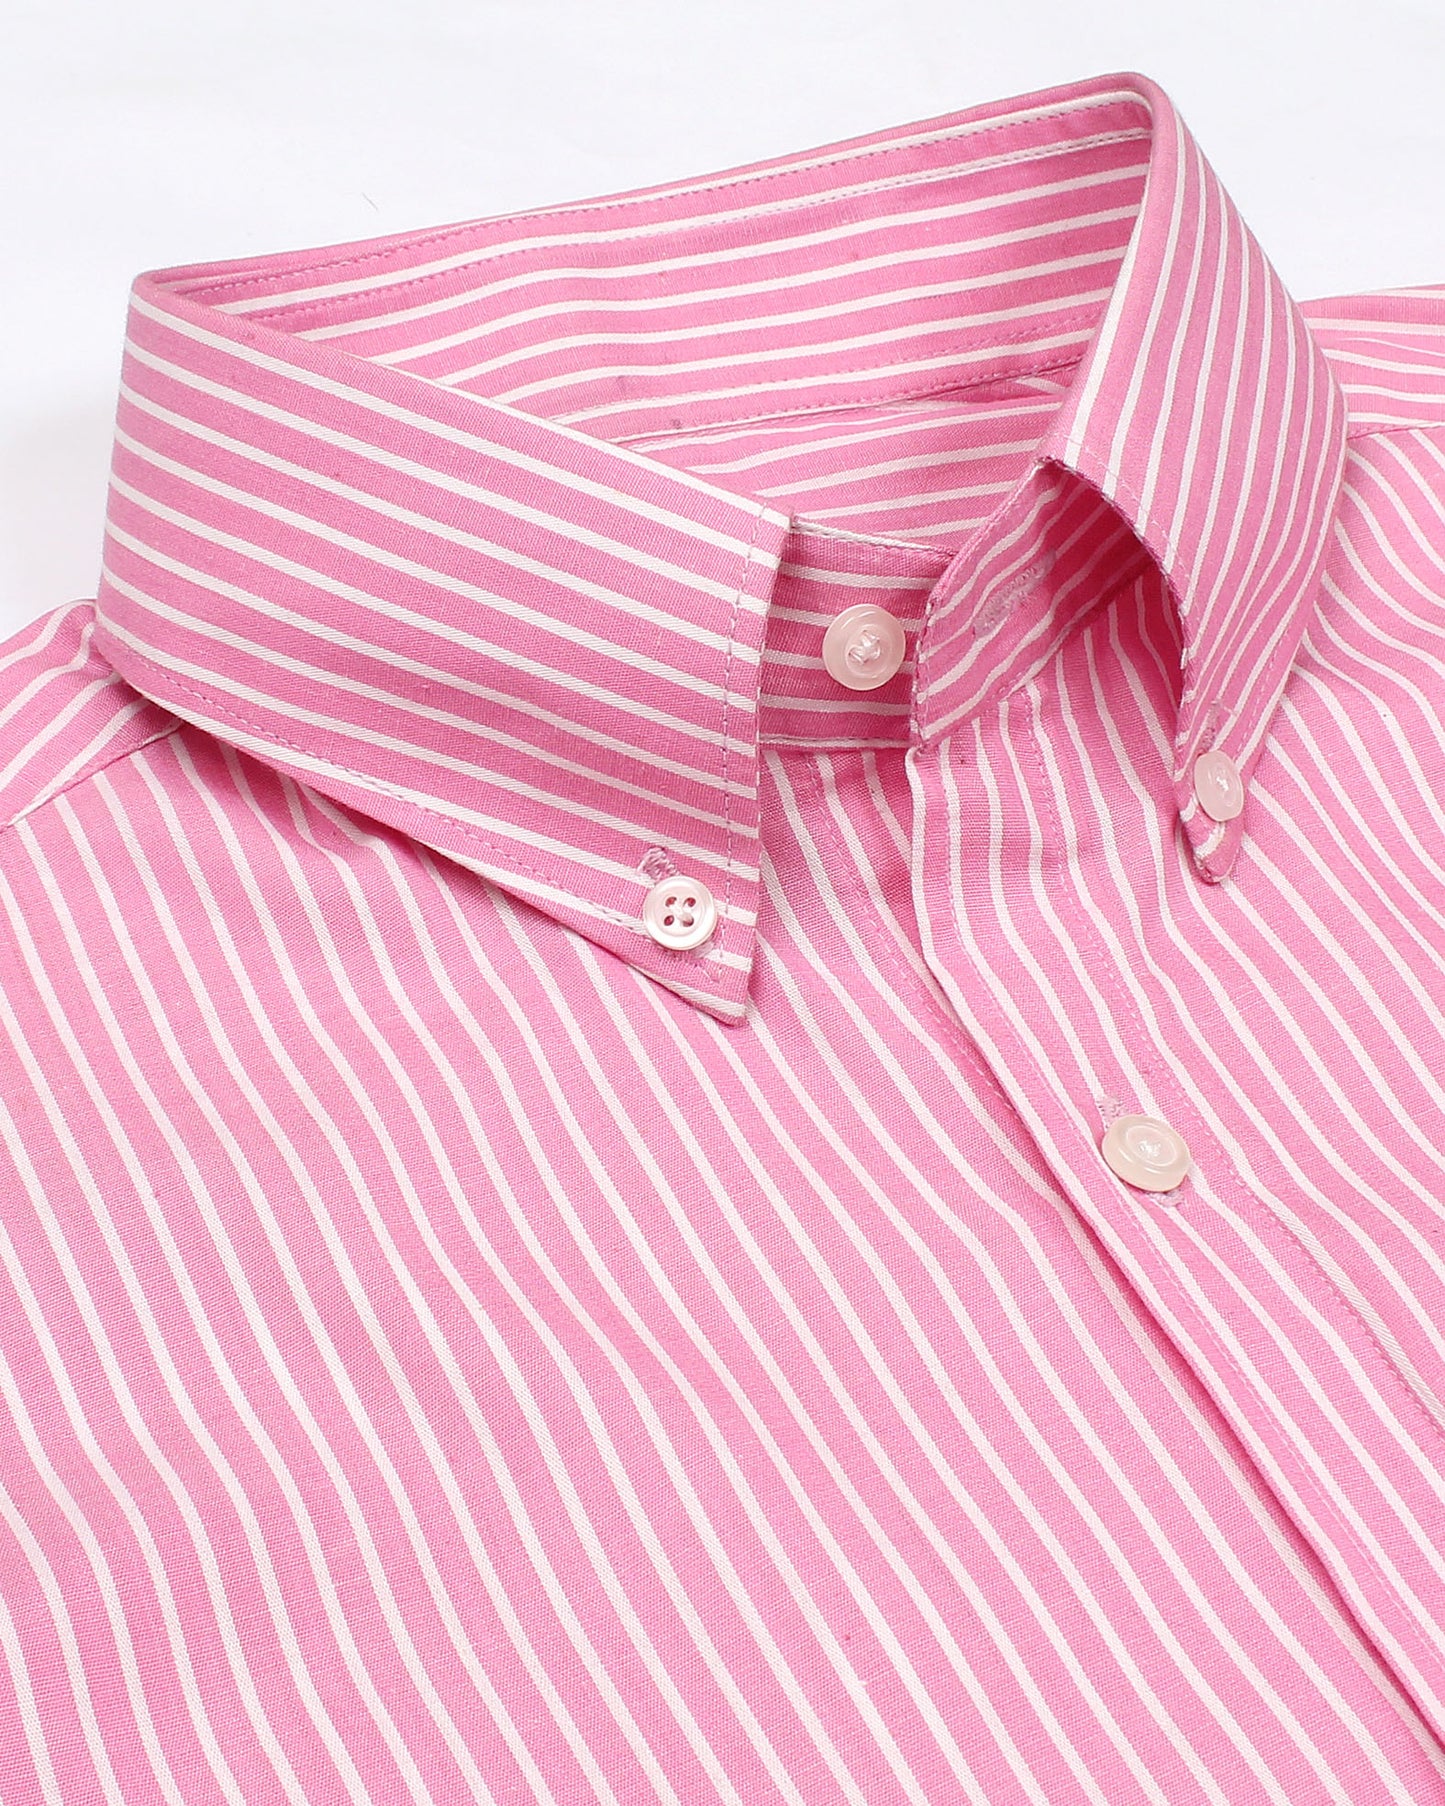 Iconic Pink R/L Button Down Shirt - Checkered